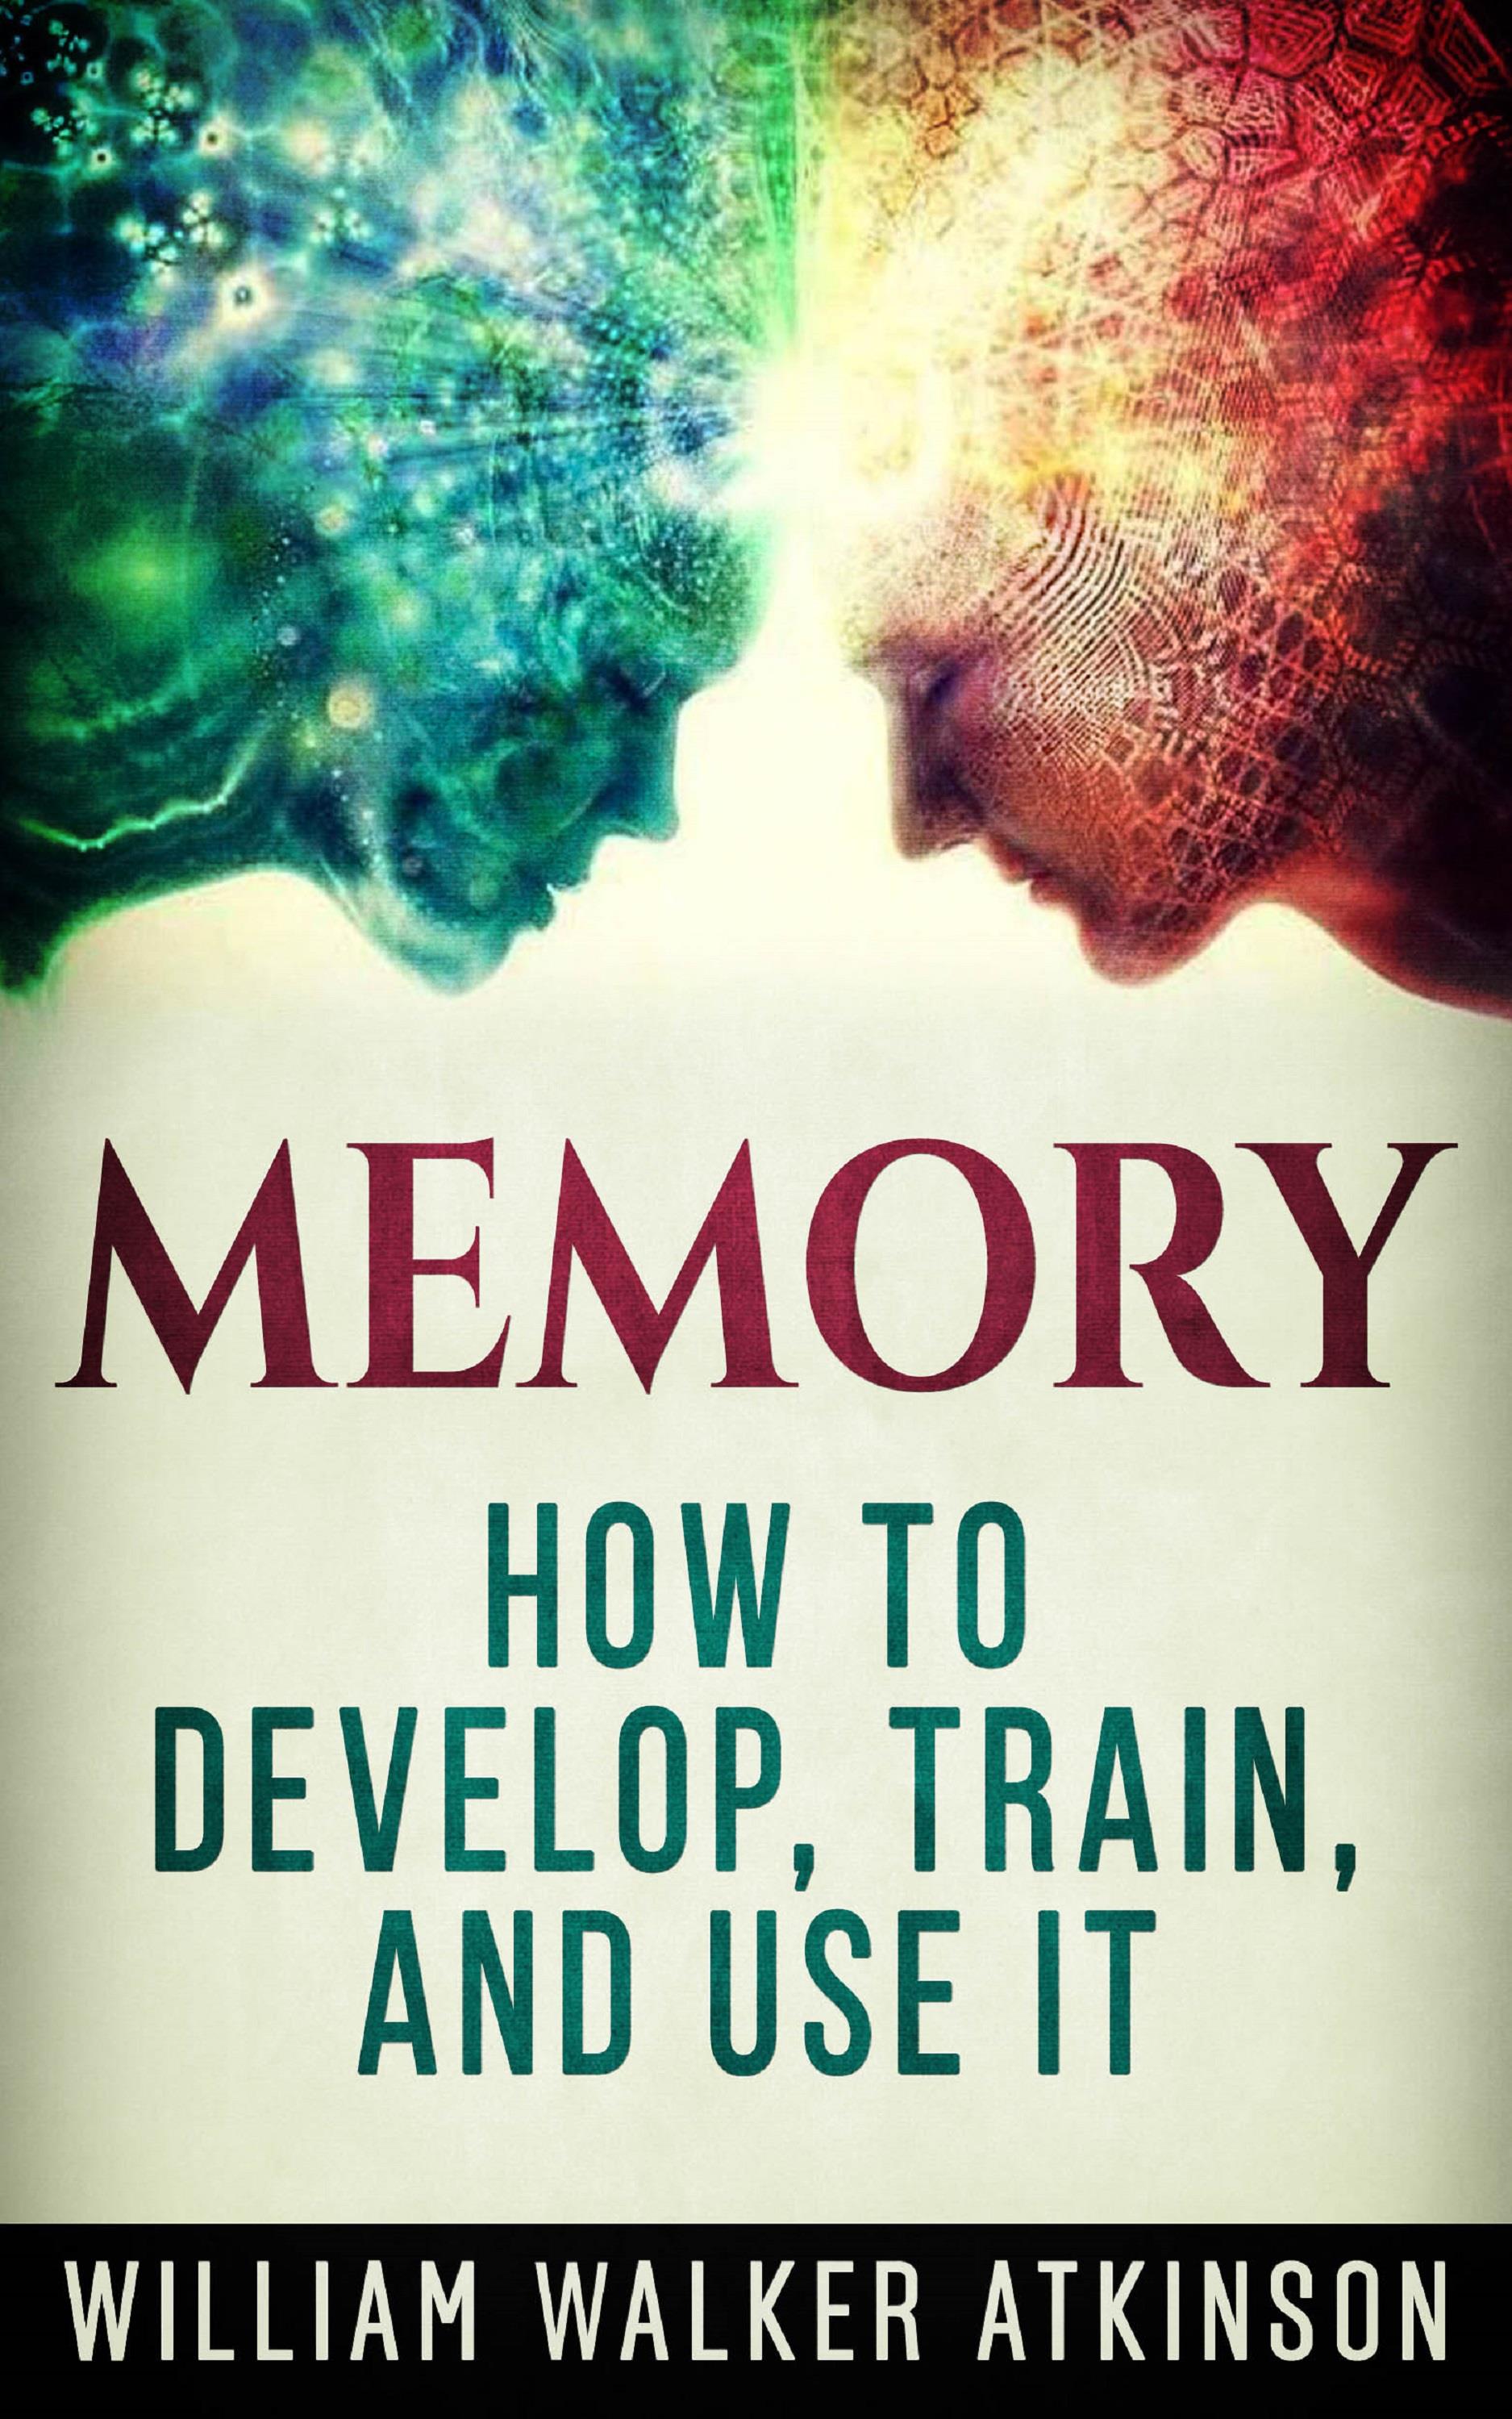 Memory - How to Develop, Train, and Use It